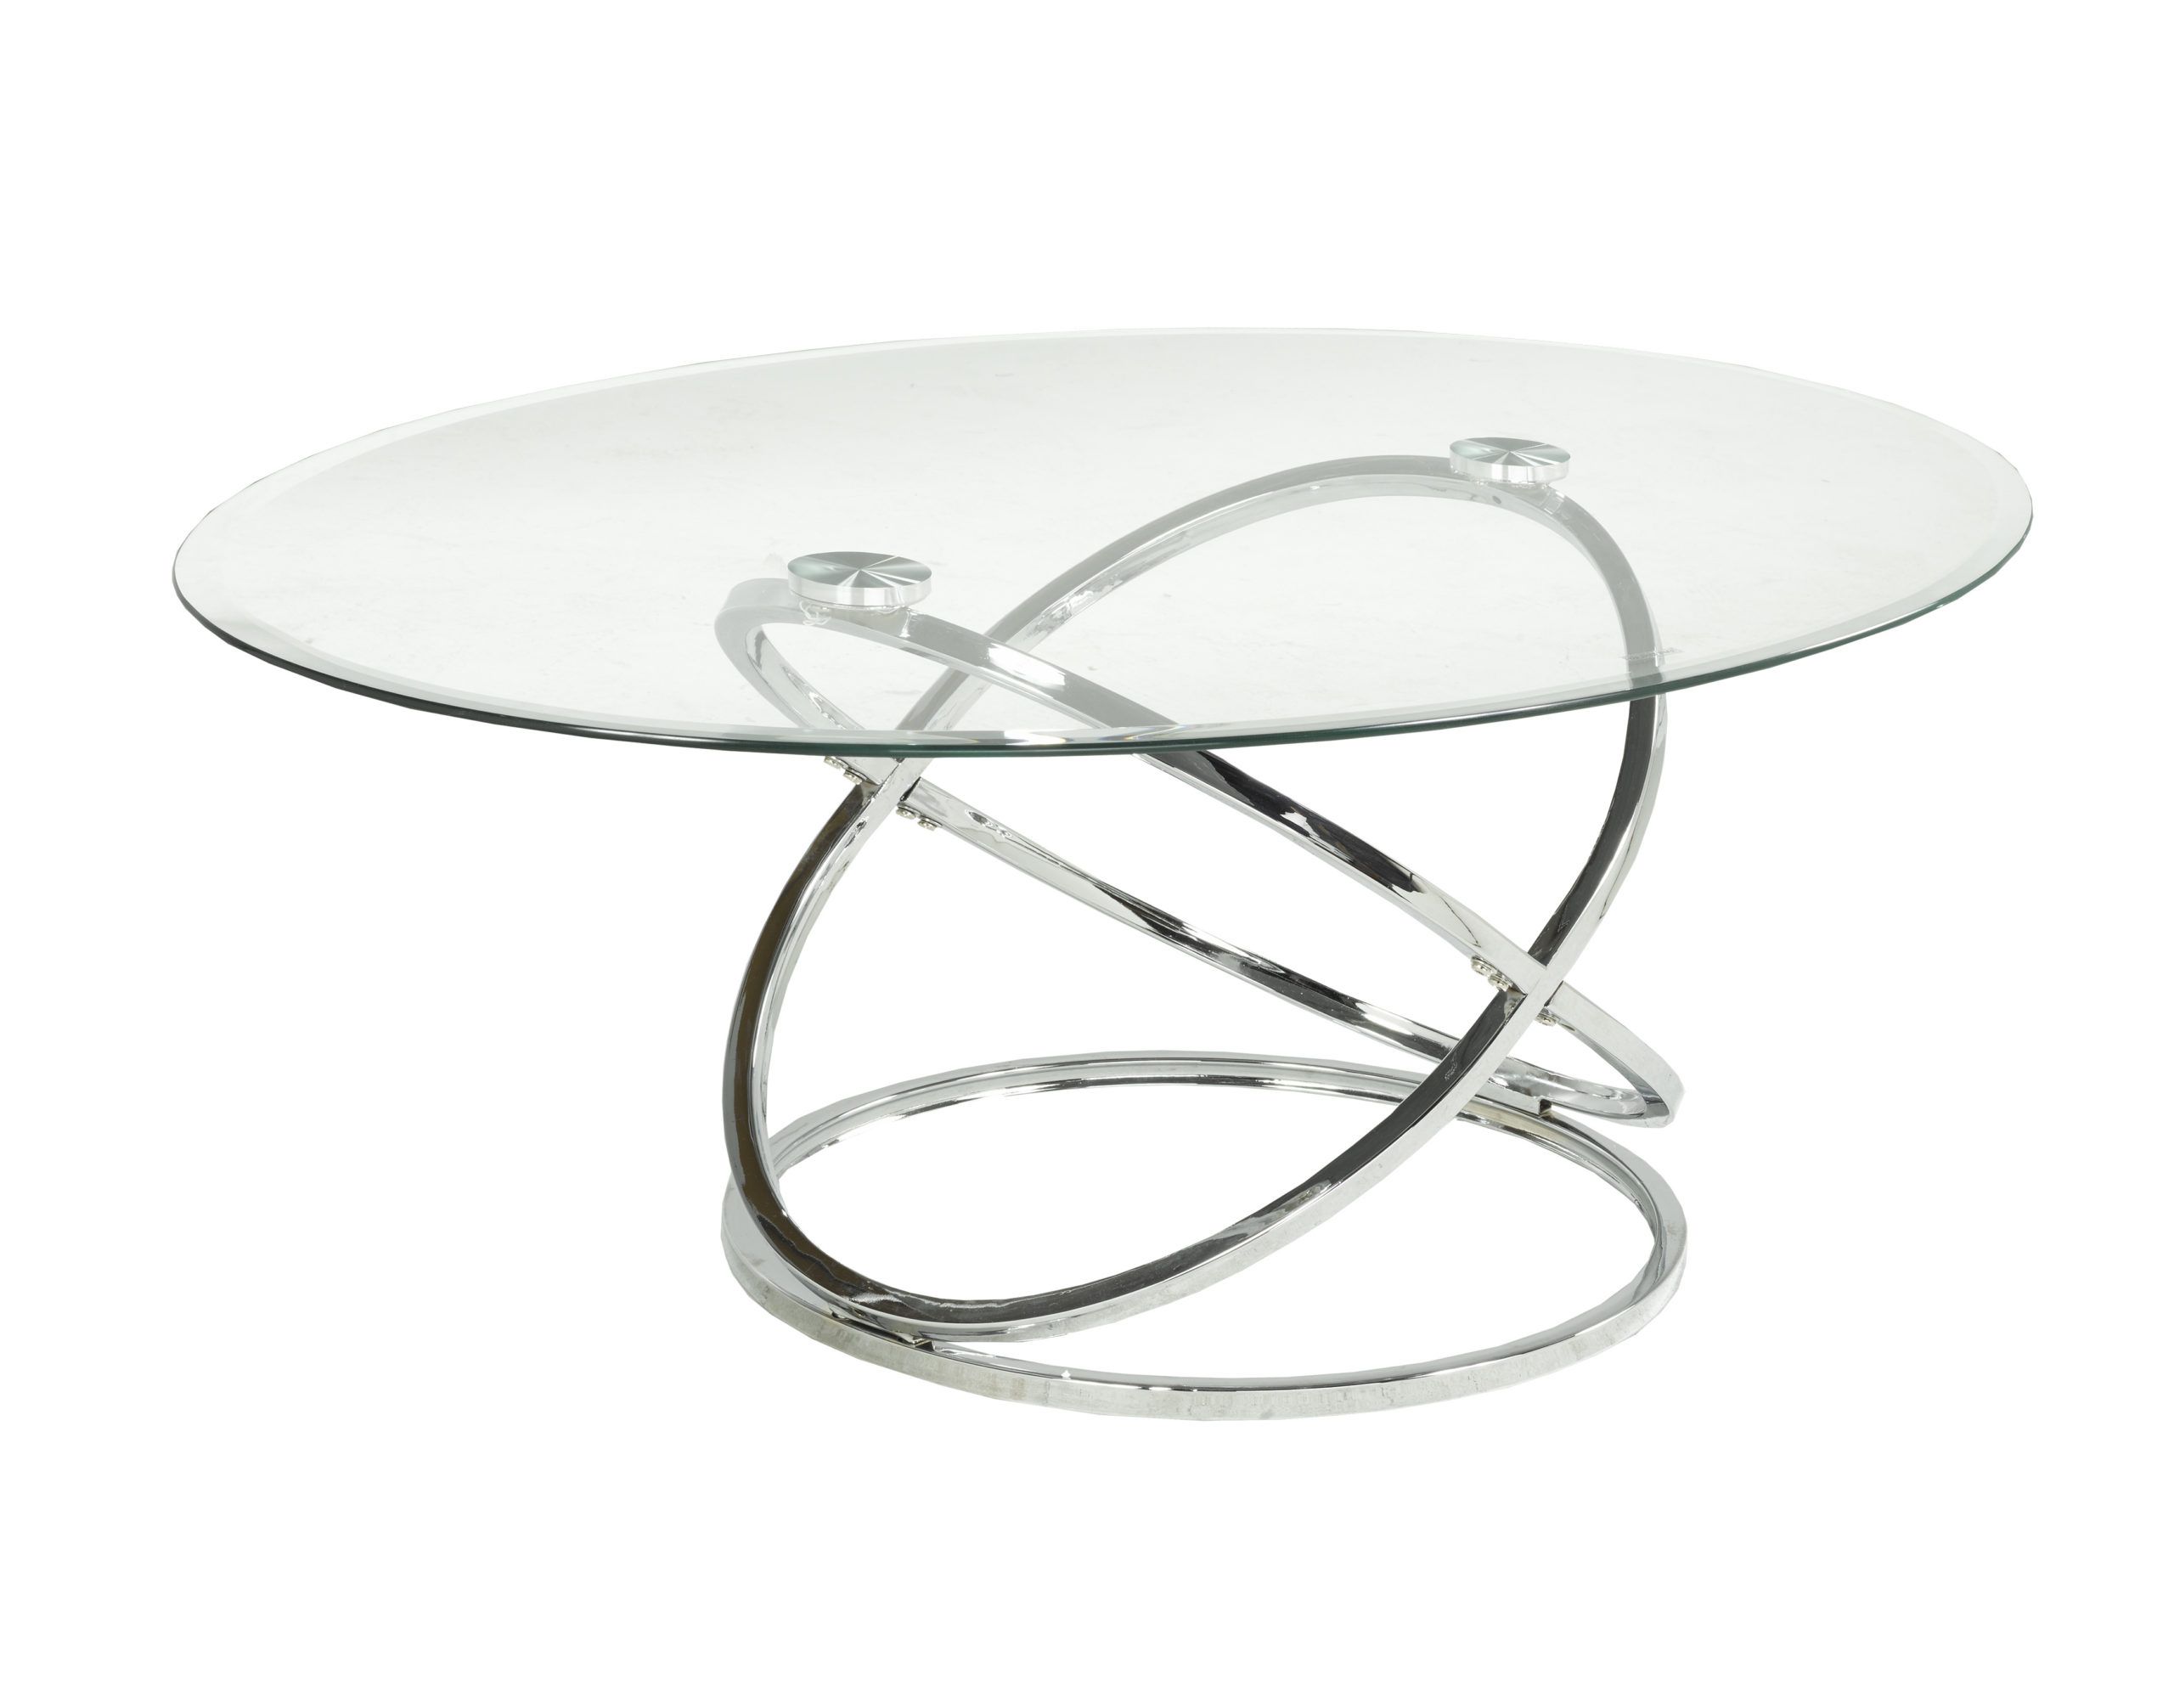 Modern Oval Glass And Chrome Occasional Tables – Arrow Furniture With Regard To Well Known Oval Glass Coffee Tables (View 3 of 10)